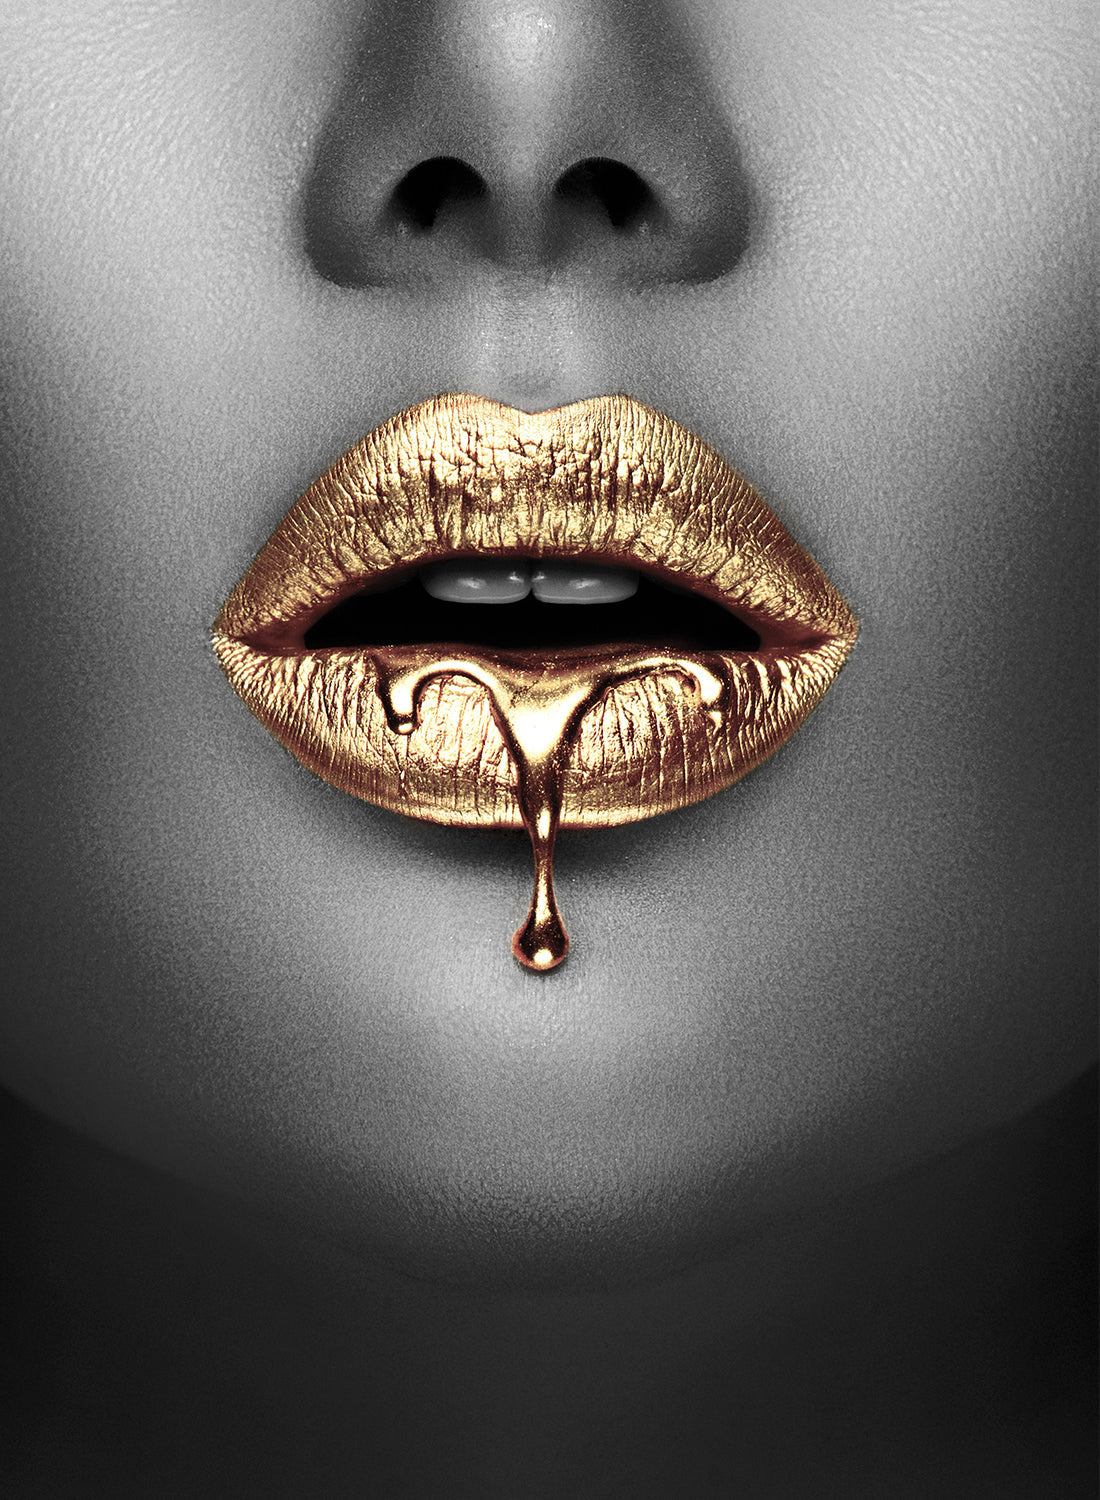 GOLD LIPS CANVAS